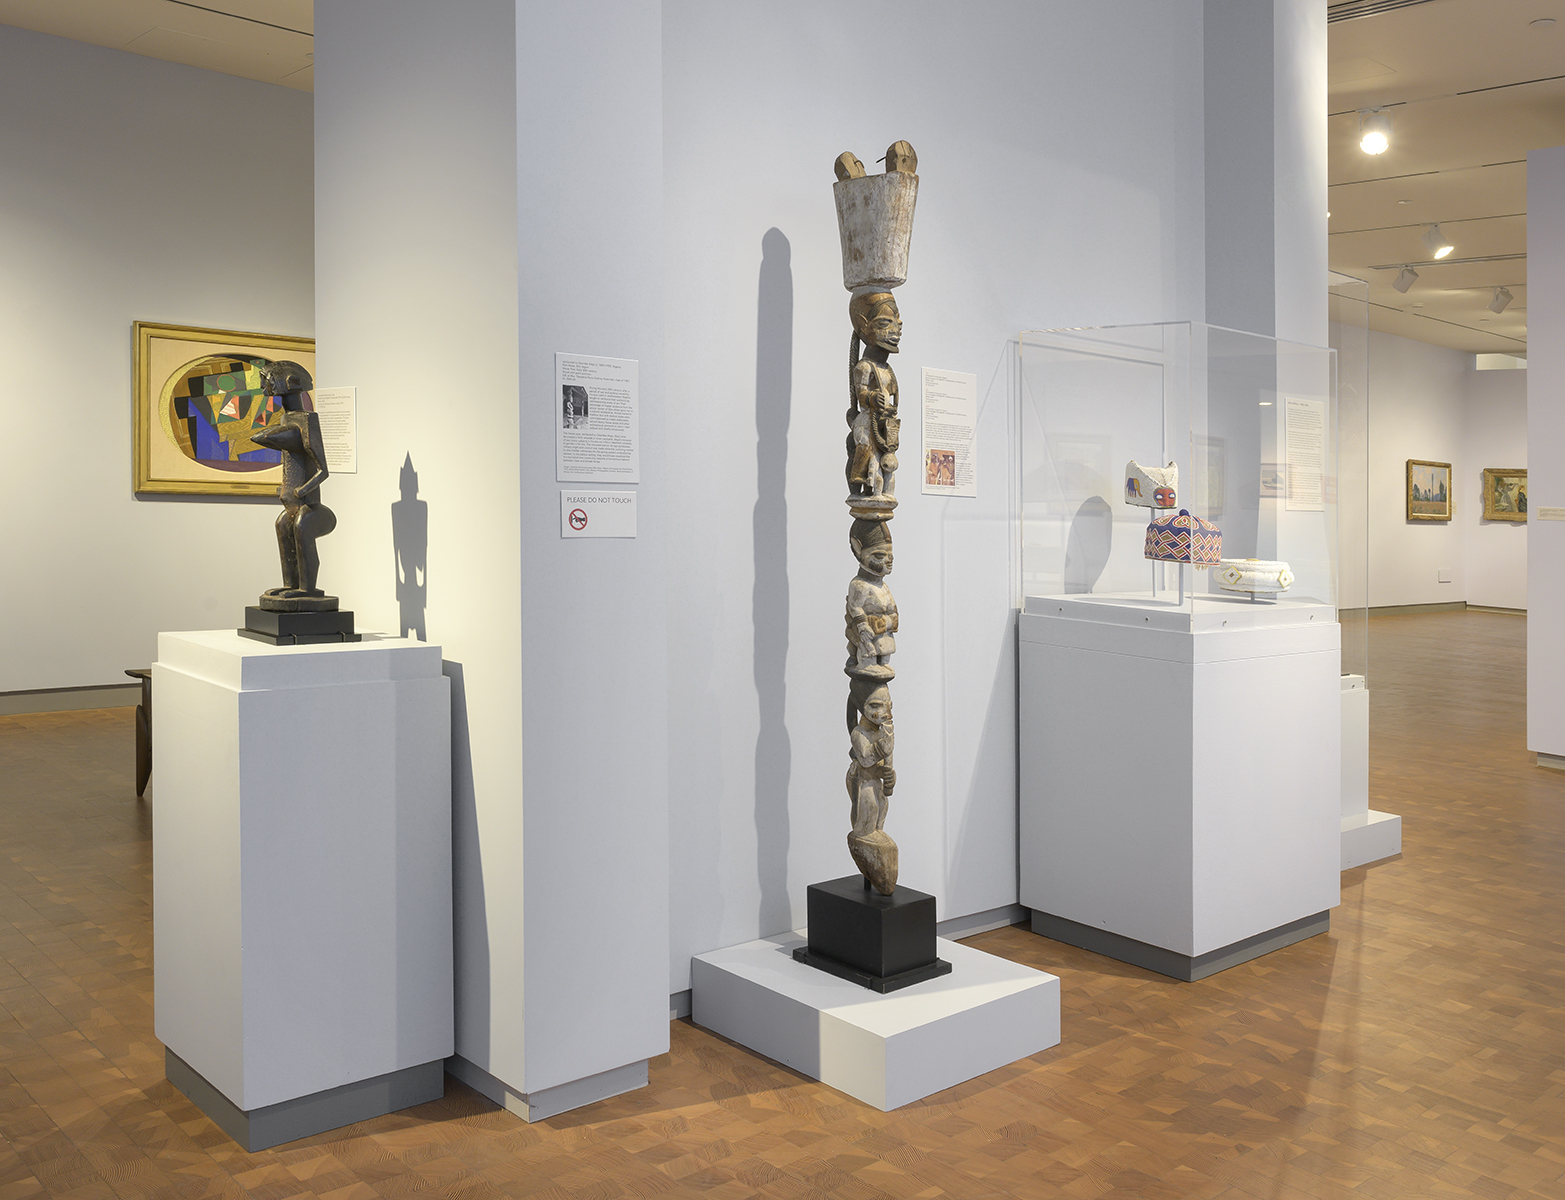 Another view of the 3rd floor Gallery, showing a variety of statues 